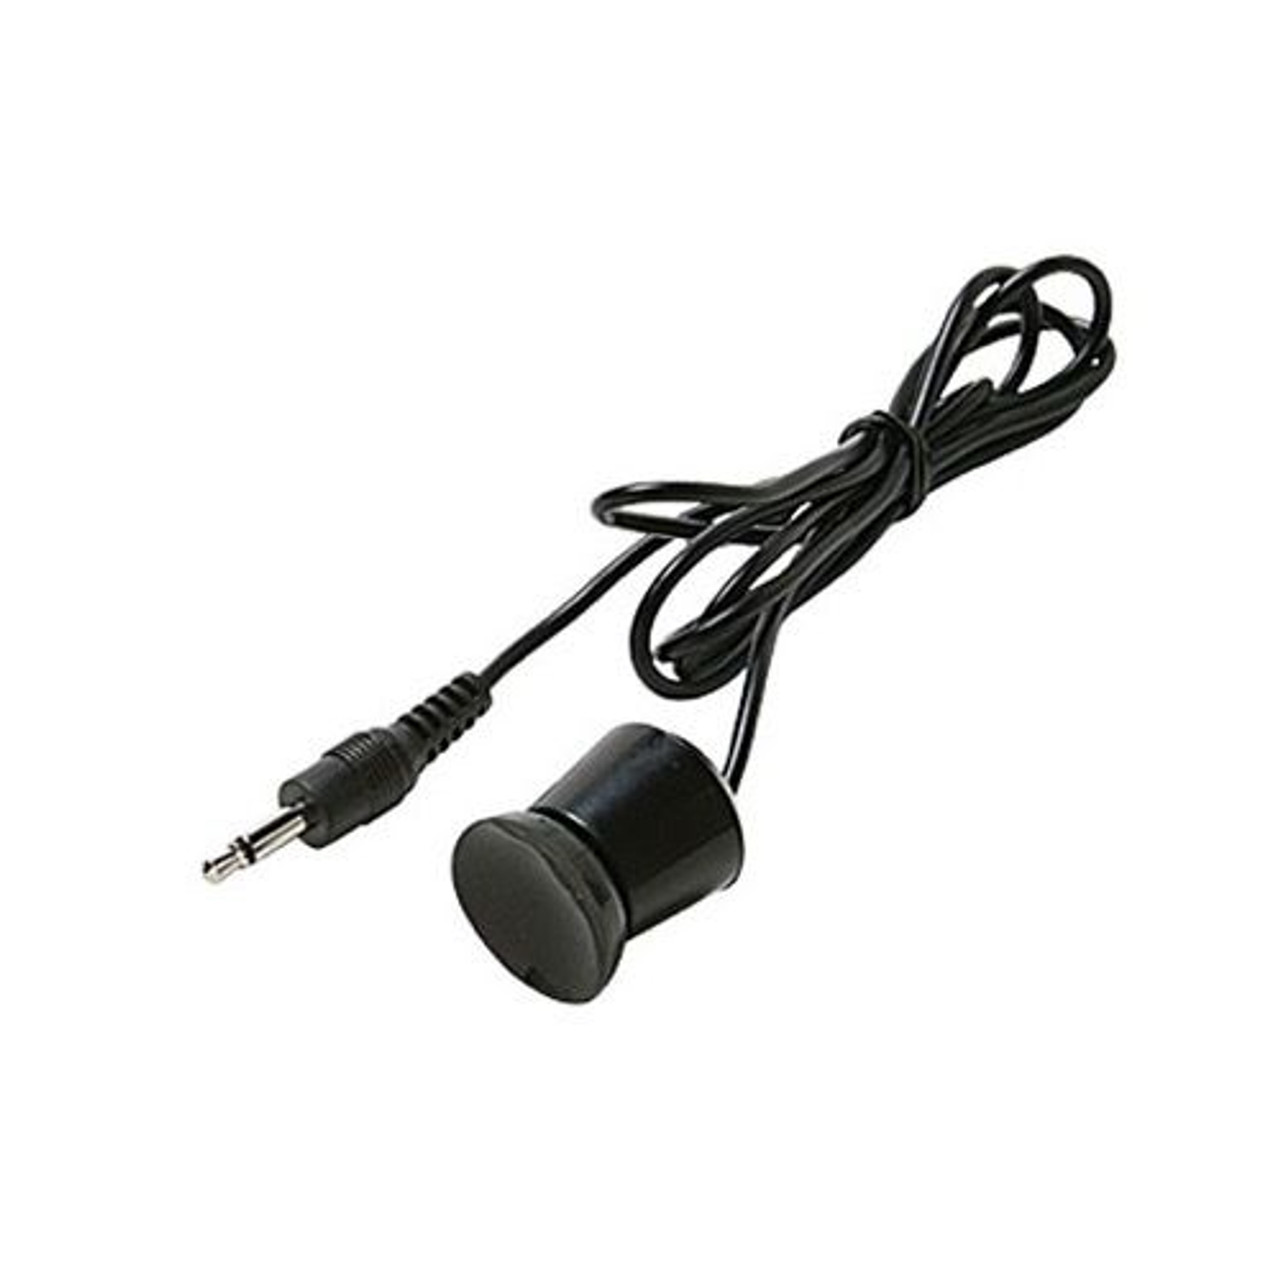 Eagle Telephone Pick Up Coil with Microphone with Suction Cup to Record Phone Conversation on Any Tape Recorder with 3.5mm Input Amplify Phone Calls